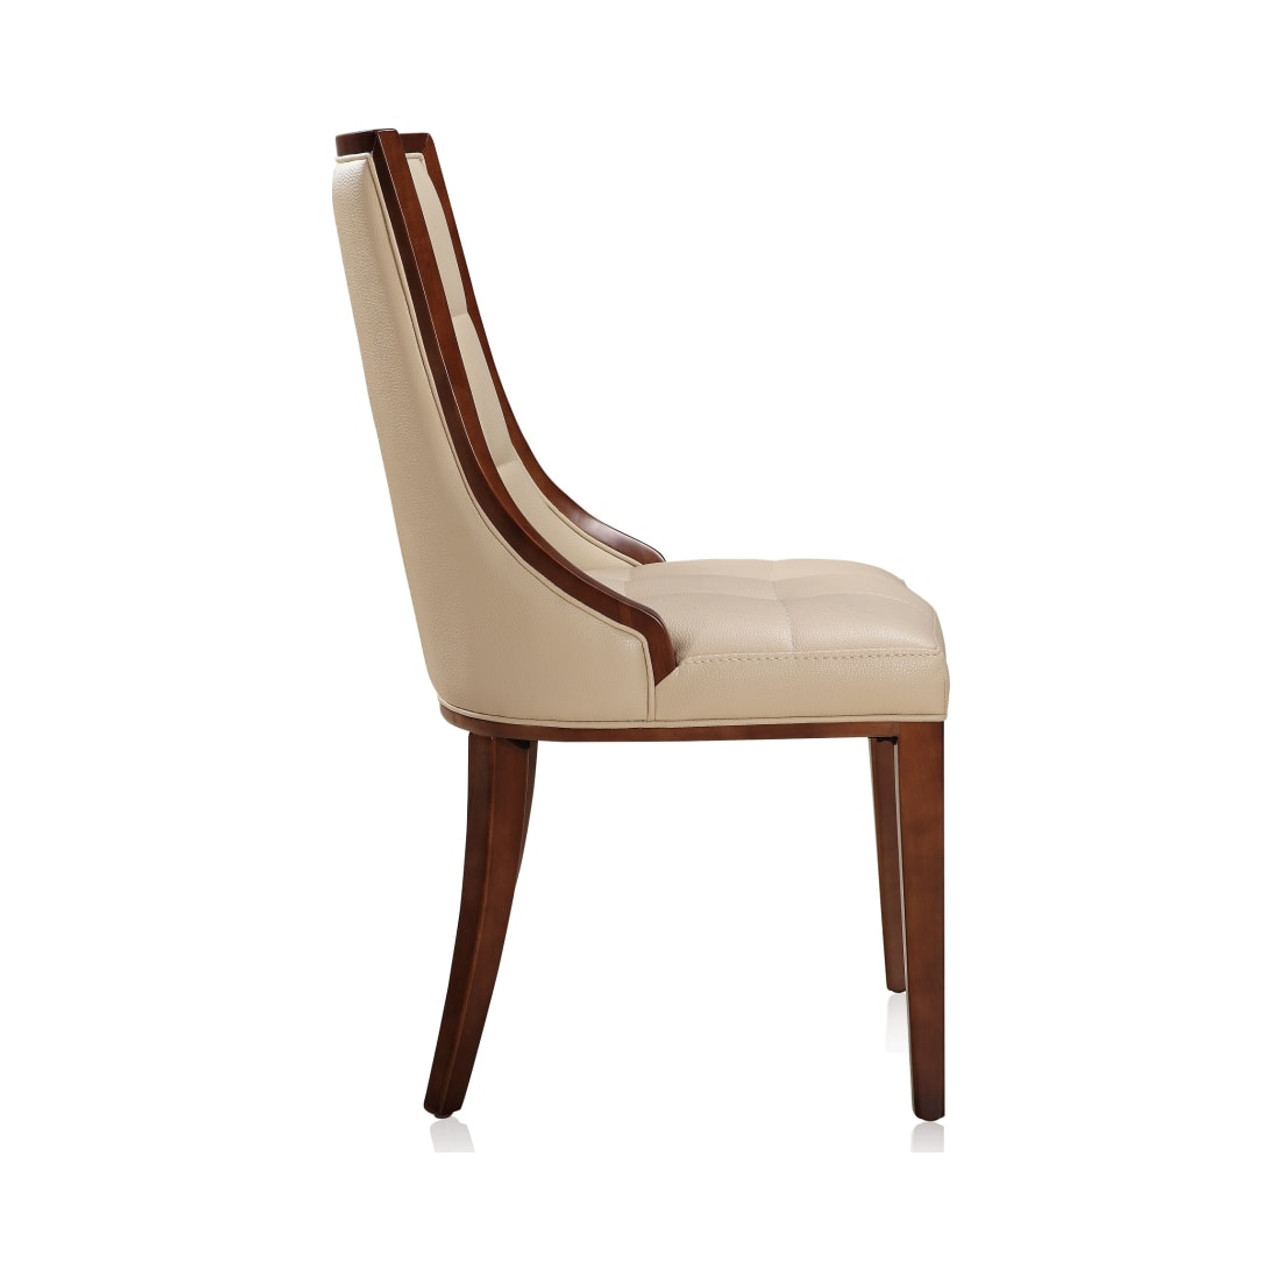 Fifth Avenue Faux Leather Dining Chair (Set of Two) in Cream and Walnut